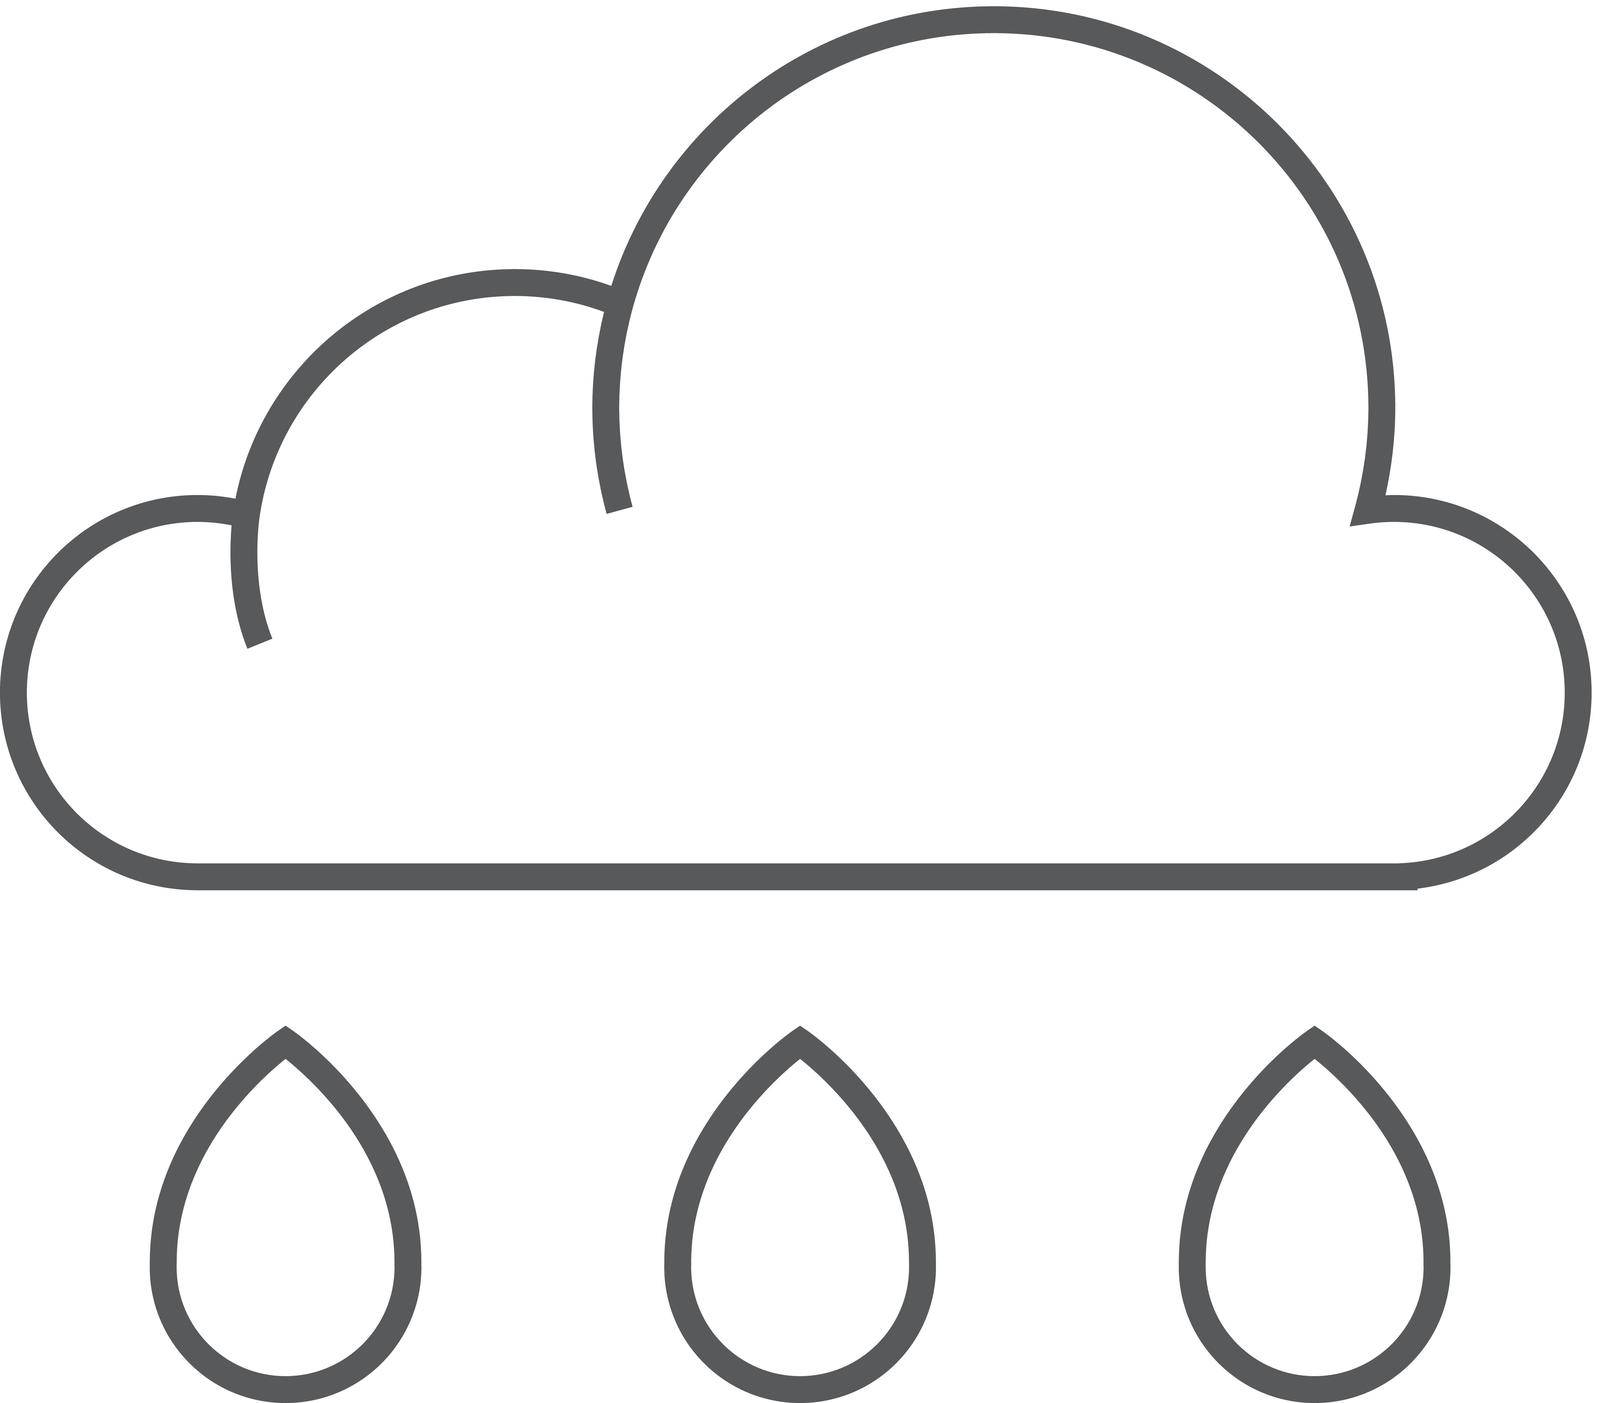 Outline icon - Rainy by puruan